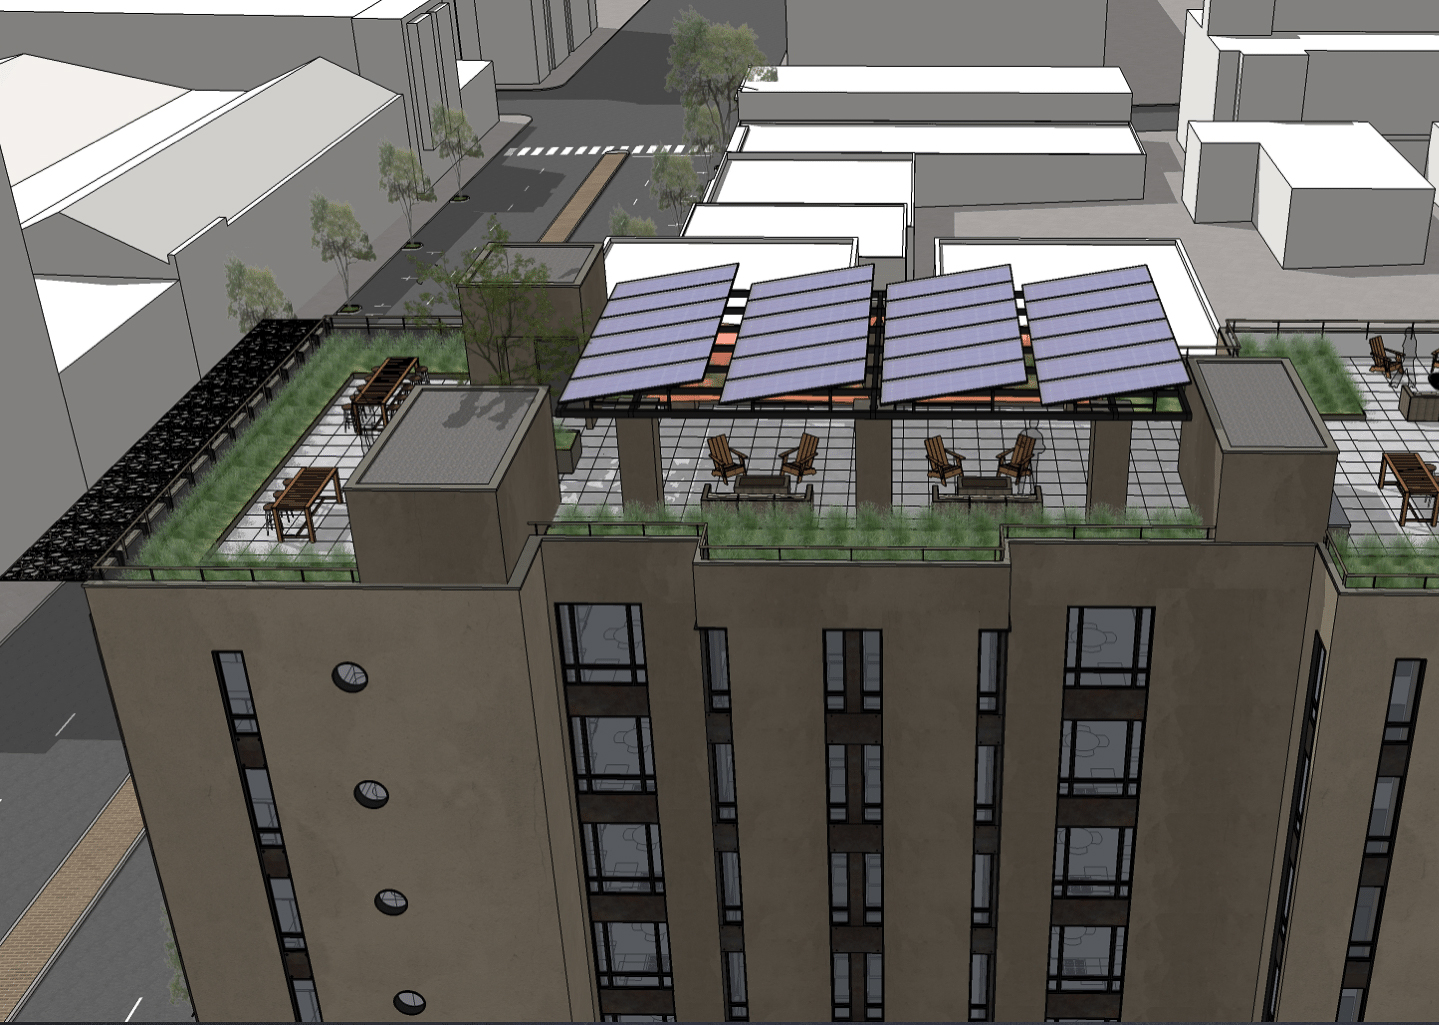 2067 University Avenue rooftop terrace, rendering by Trachtenberg Architects